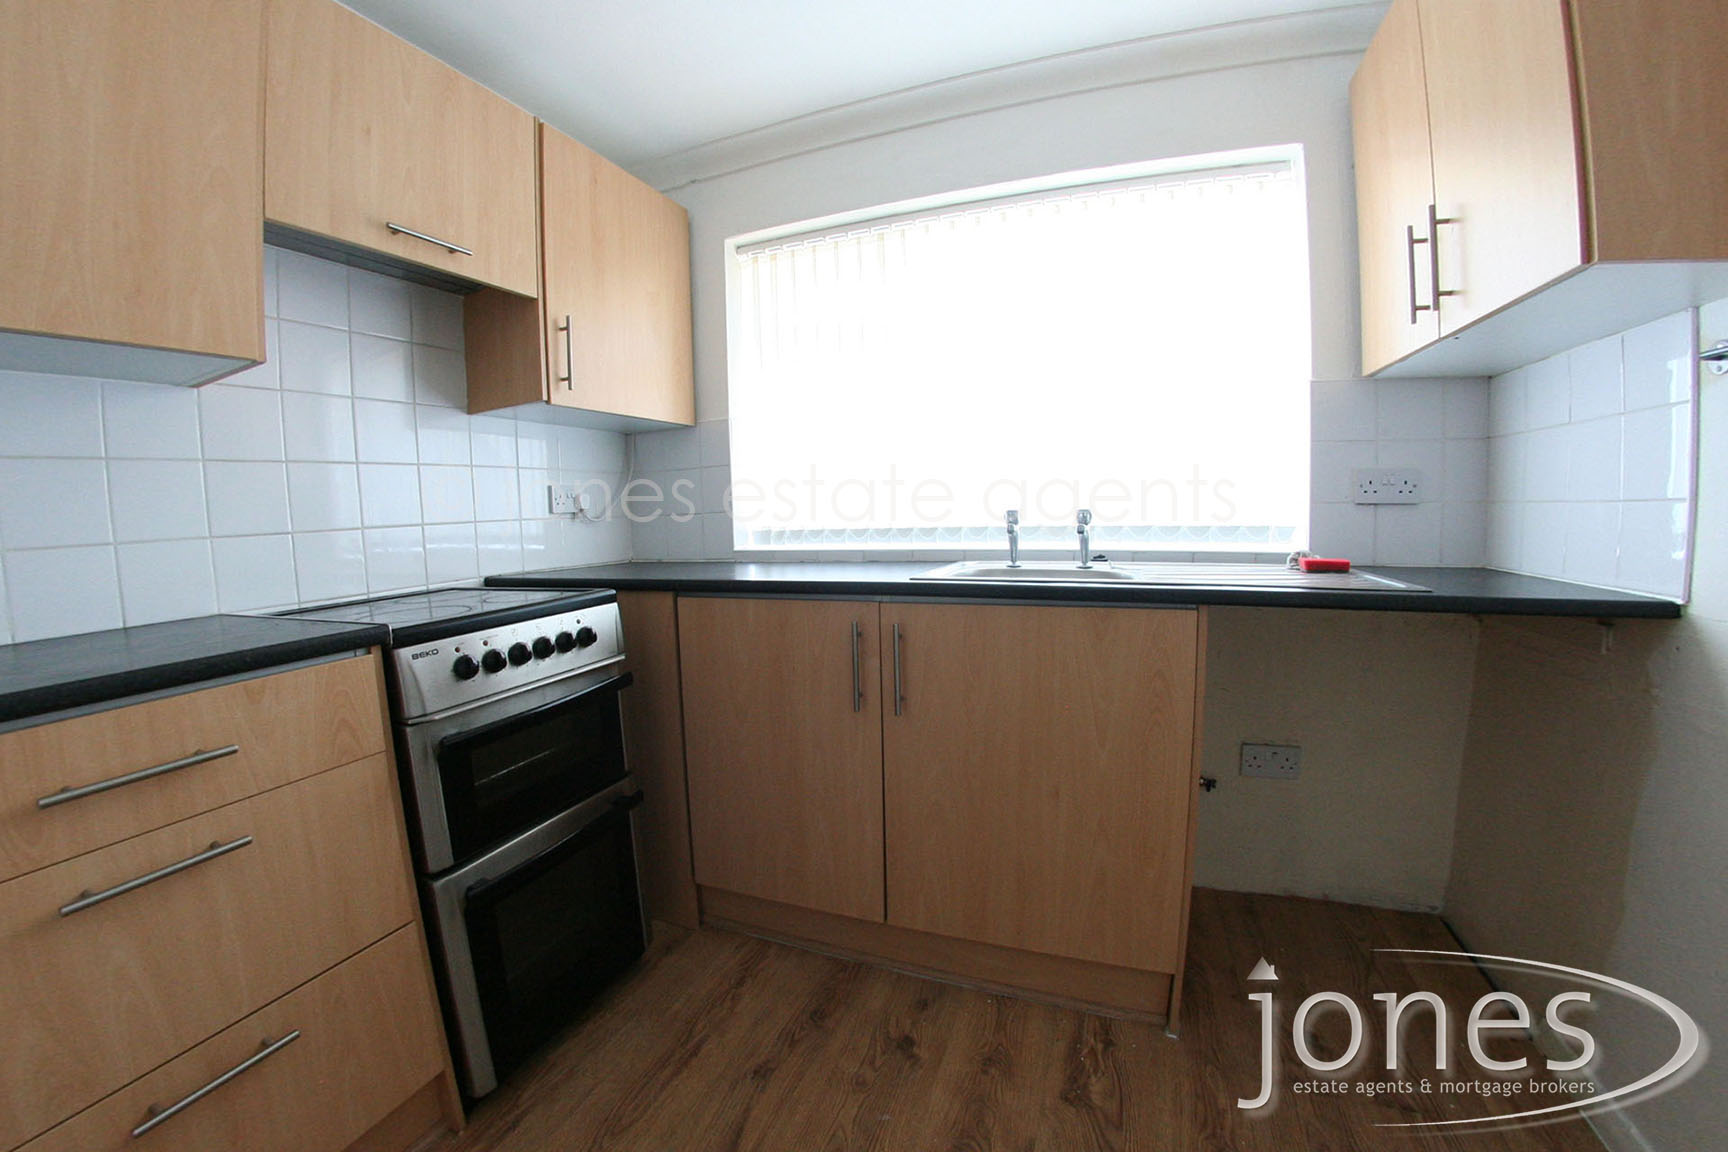 Home for Sale Let - Photo 04 North Road West,Wingate,TS28 5AP